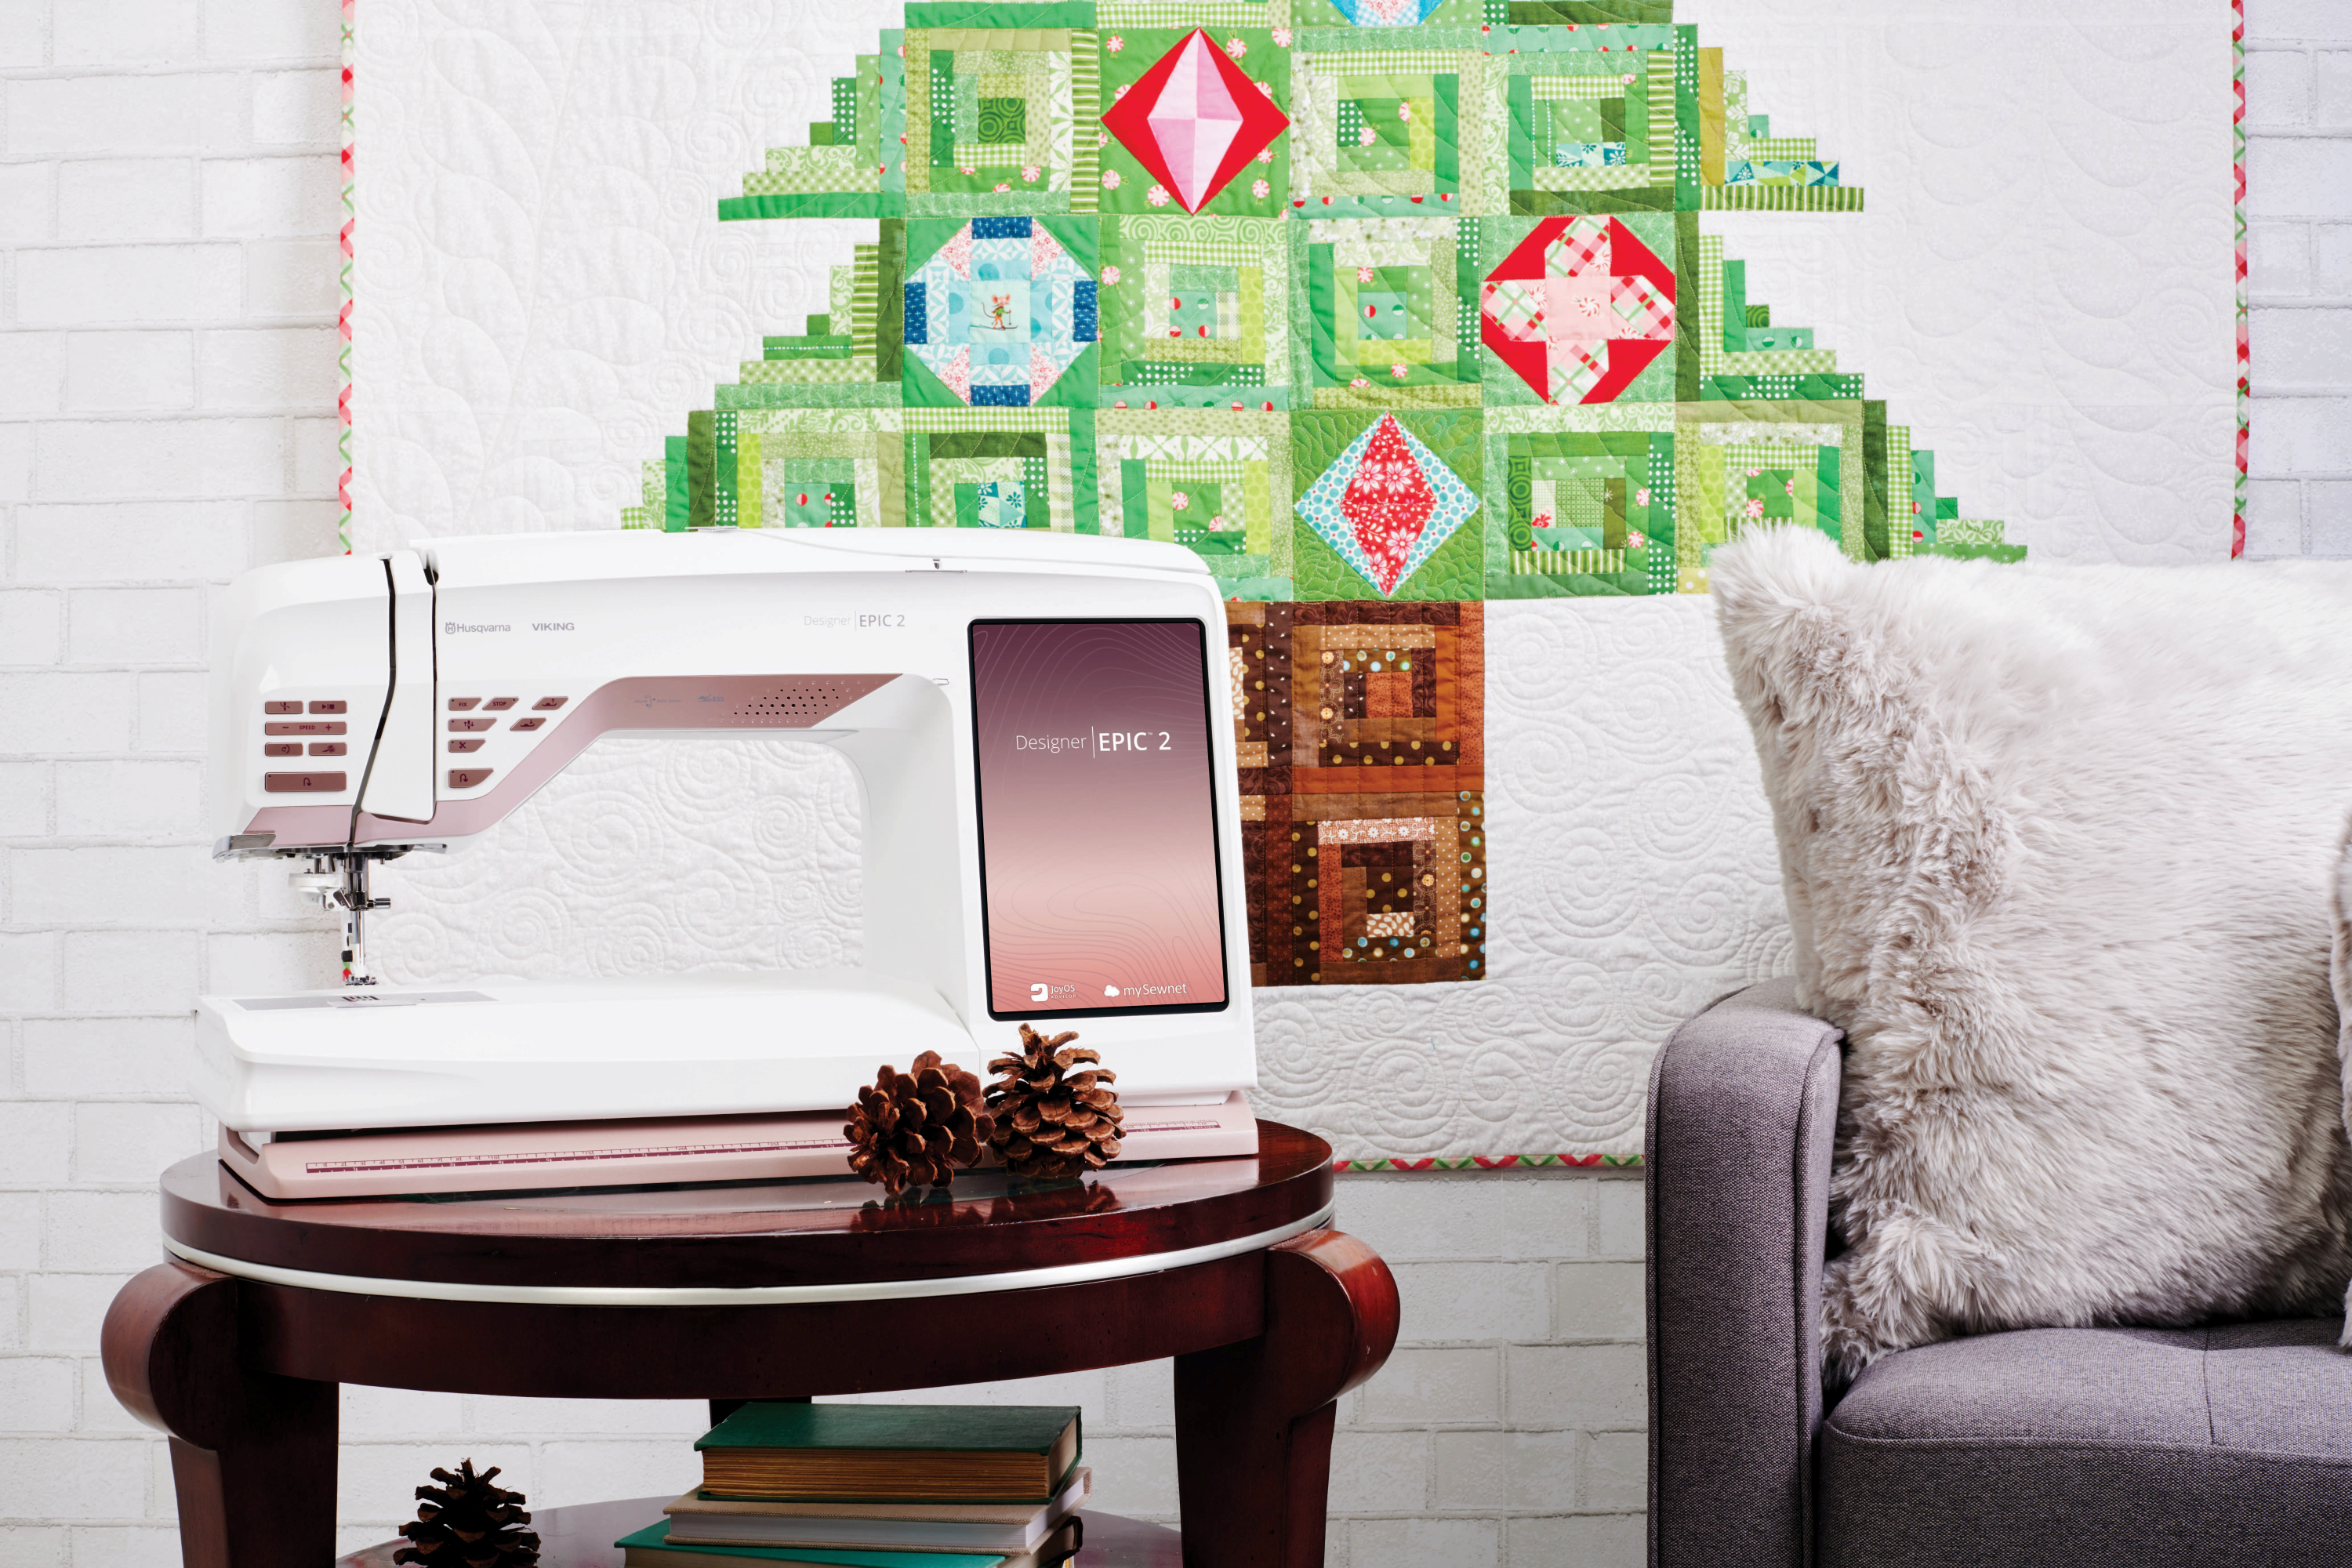 Husqvarna Viking Designer Epic 2 Sewing and Embroidery Machine on a table in a room with christmas decor